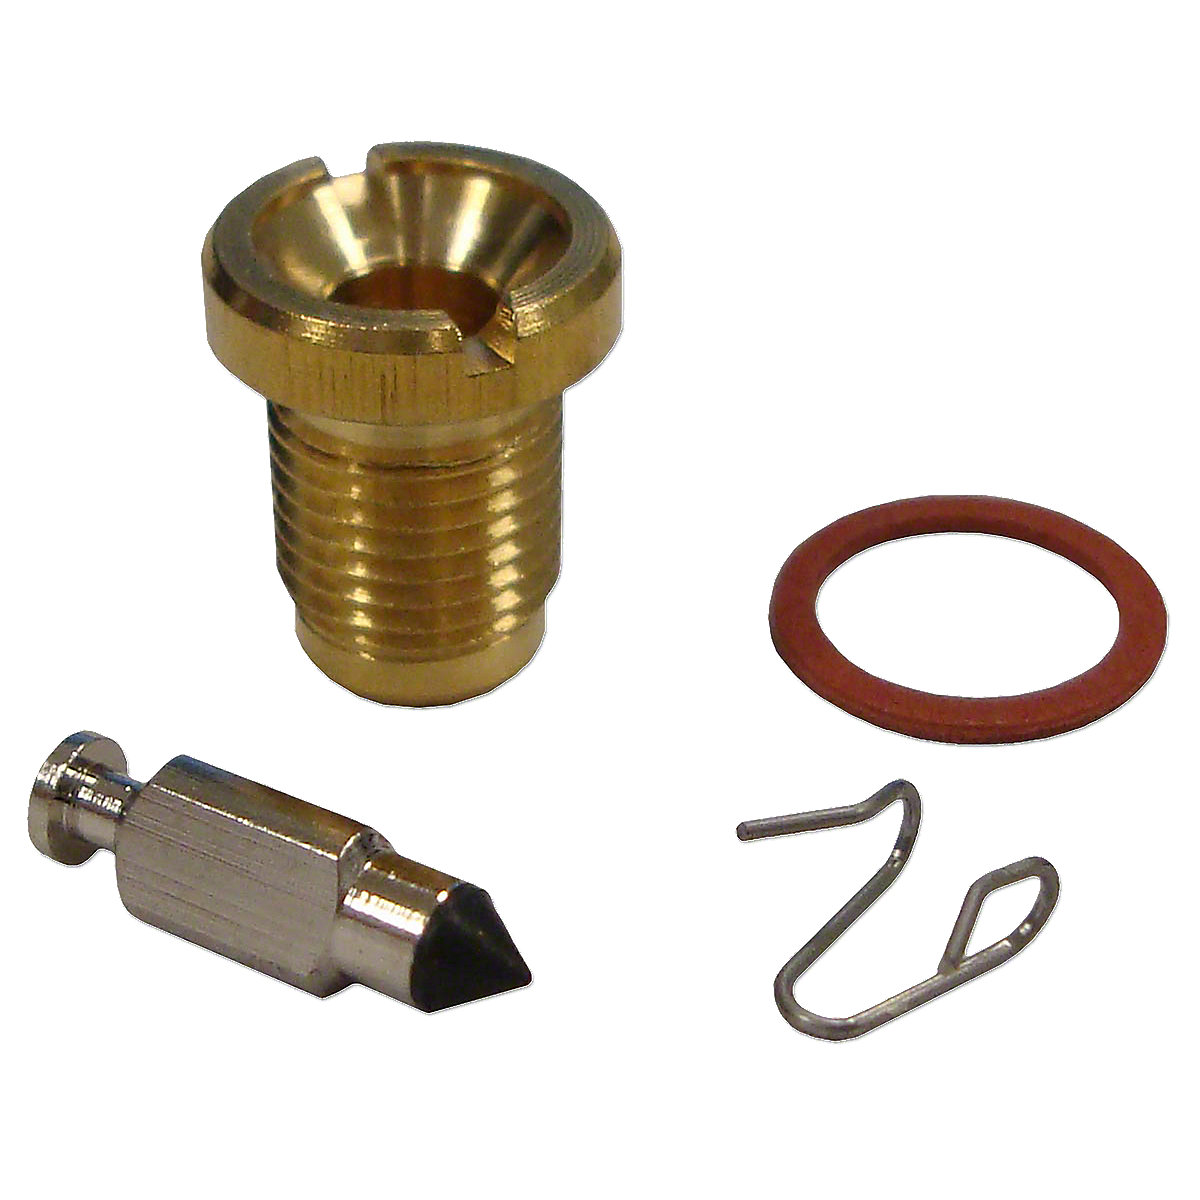 Viton Needle Float Valve For Marvel Schebler Carburetors Fits Oliver: 60, 66, Super 66, Super 77, and 660. PLEASE SEE CARB #\'S BELOW: All Carburetors With TSX49, TSX120, TSX363. Viton Needle and Seat Valves help stop Carburetor flooding. Made in the USA.